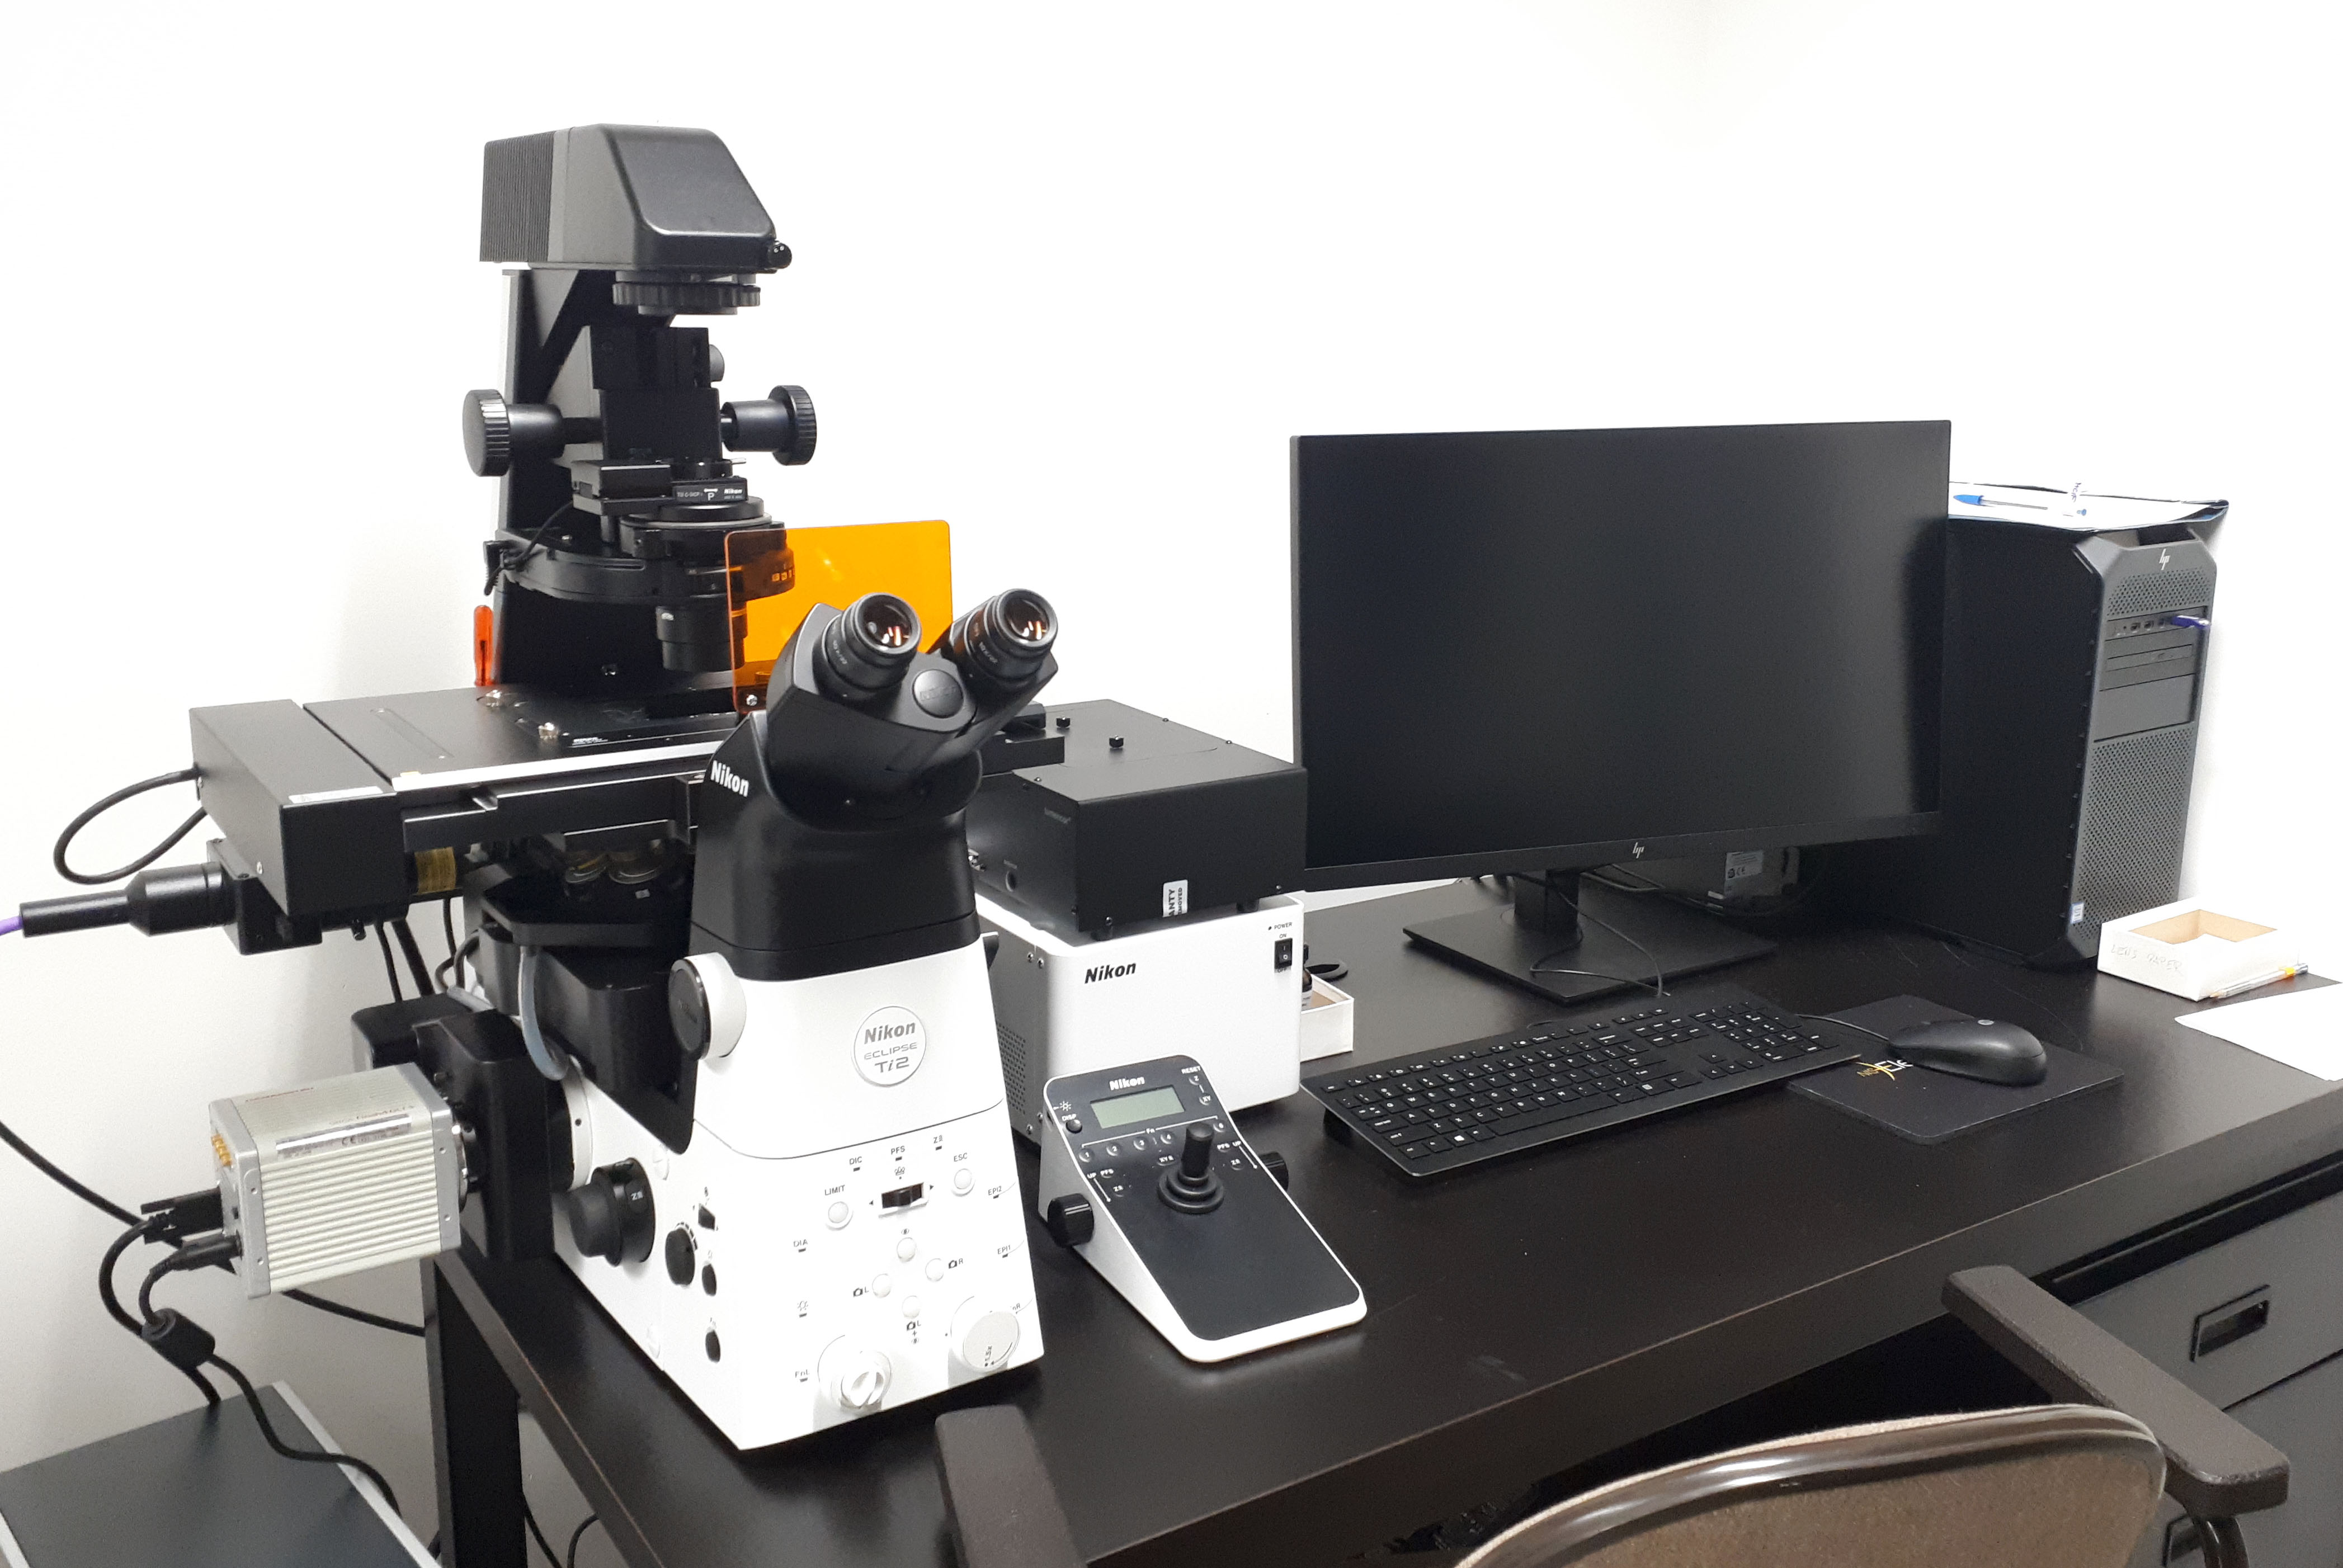 A picture of the Nikon Eclipse Ti2 inverted microscope with accessory equipment and computer